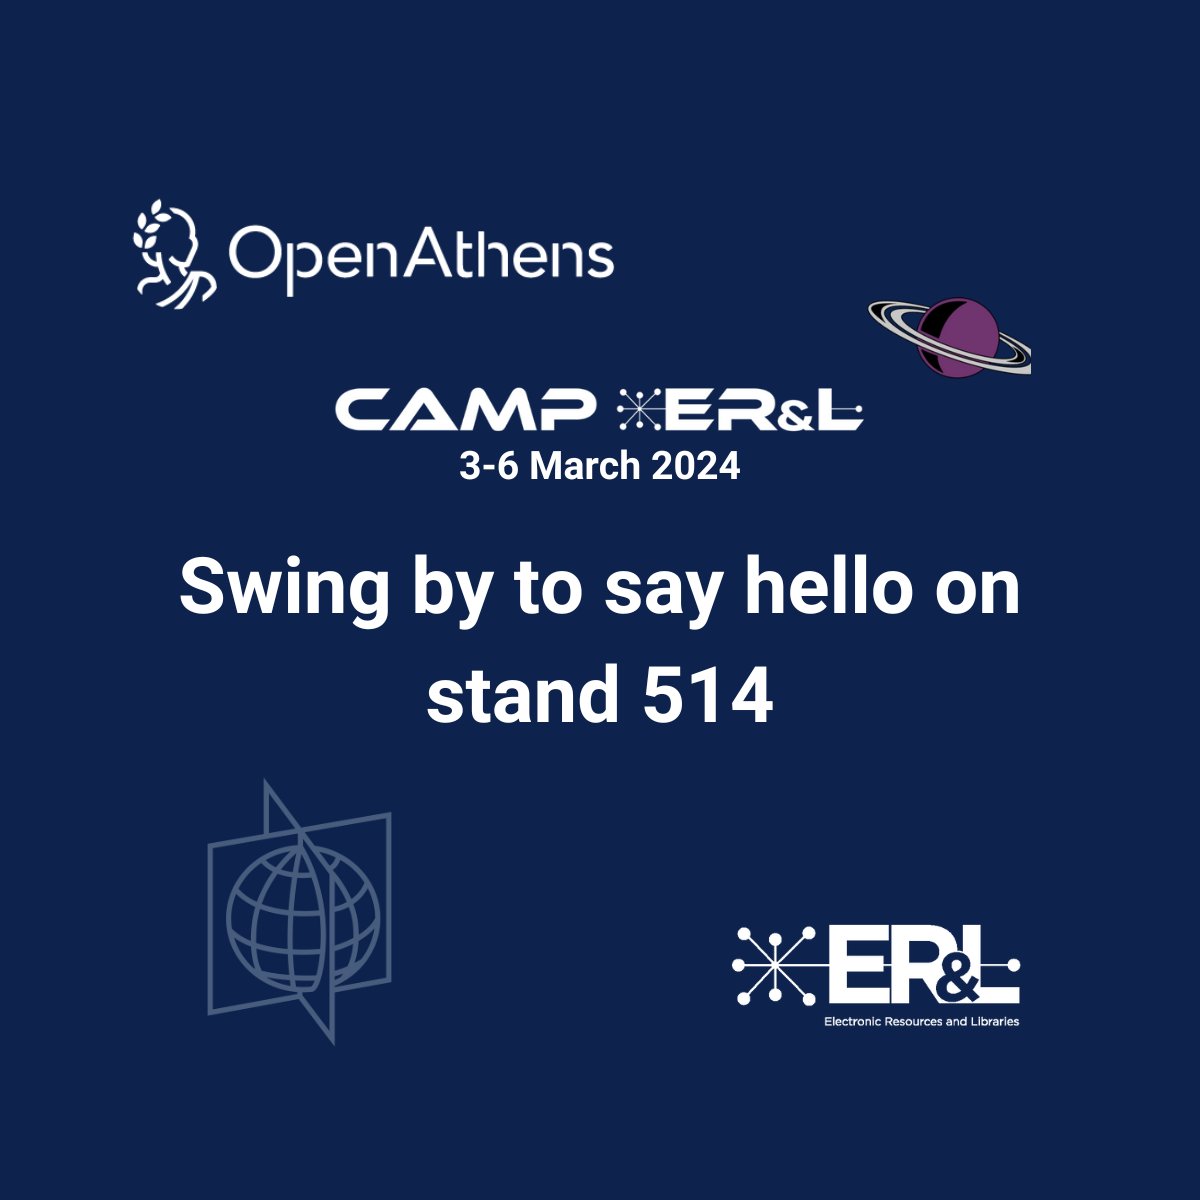 Calling all ER&L folks! We're super excited to see all of you in Austin! Swing by our stand 514, we'd love to chat and see how OpenAthens can help you! If you'd like to secure a time to catch up with James at the event please get in touch - bit.ly/49QroIb